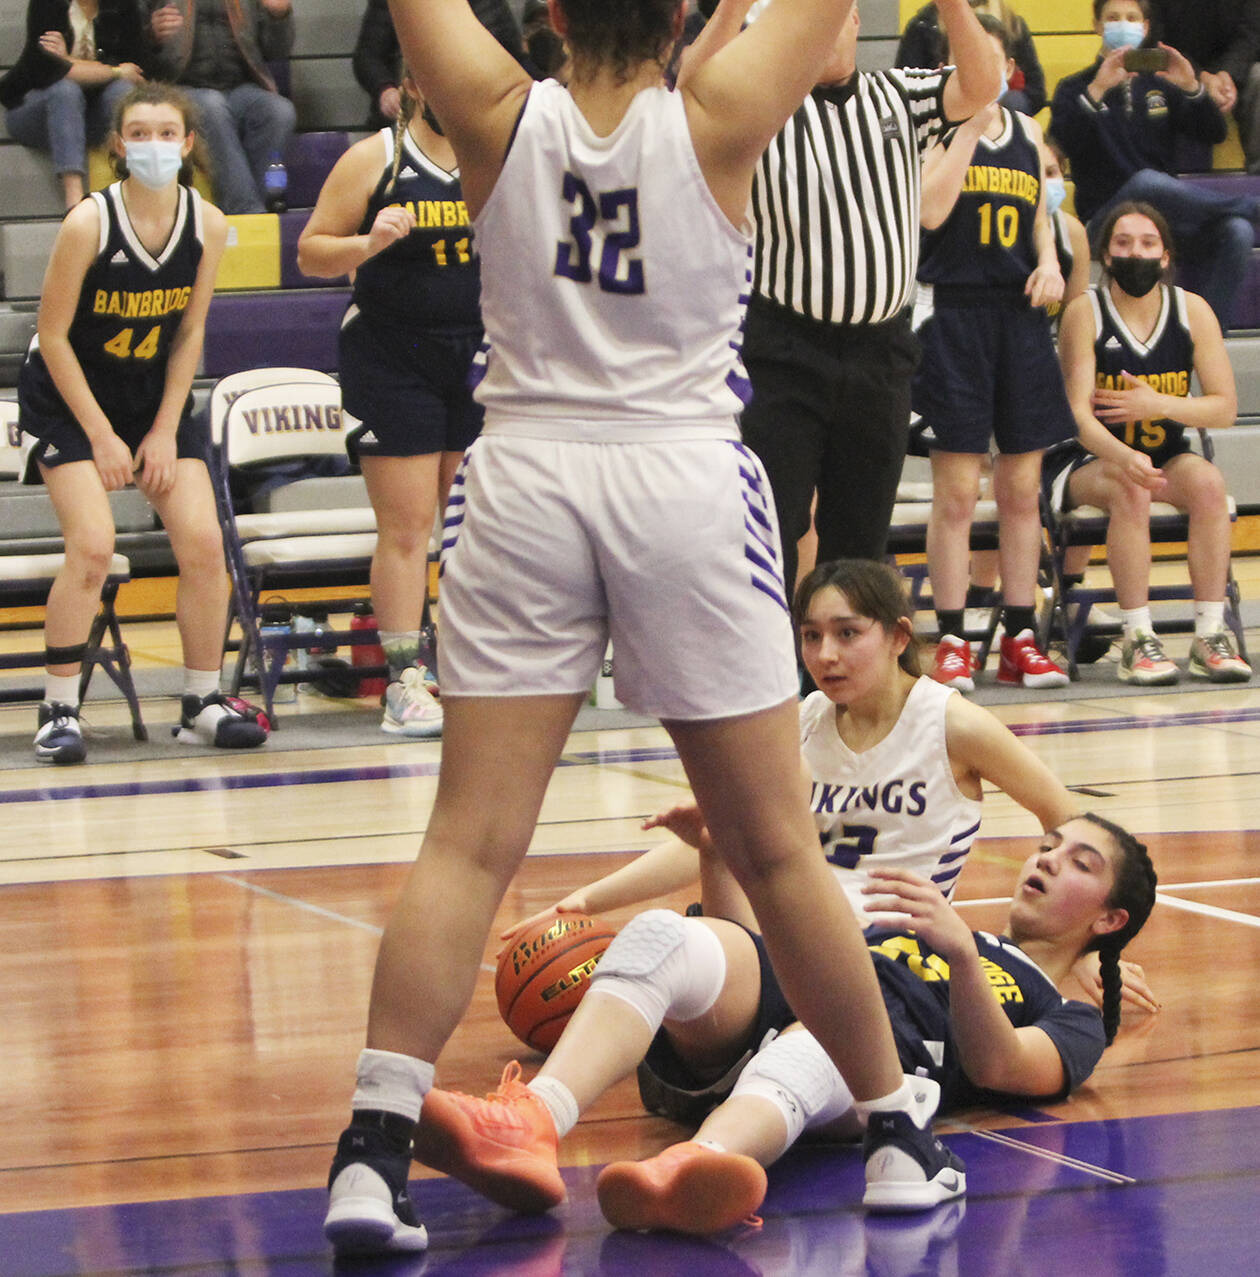 Jade Sunnenberg (12) of NK hits the floor with Ghadir Ramadan of BHS as they try to come up with a loose ball.